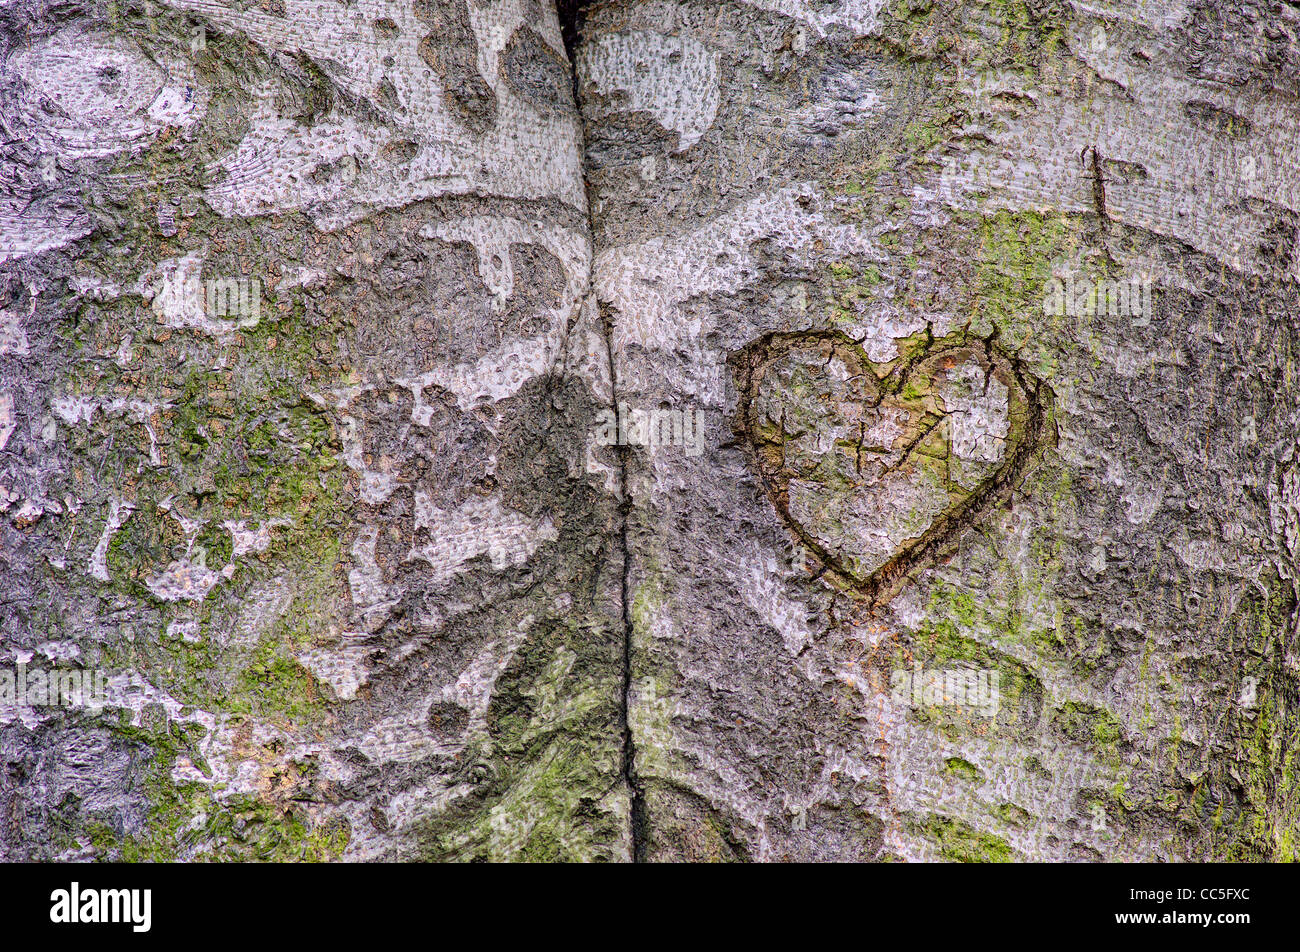 Old beech tree trunk covered with algae Fagus sylvatica Stock Photo